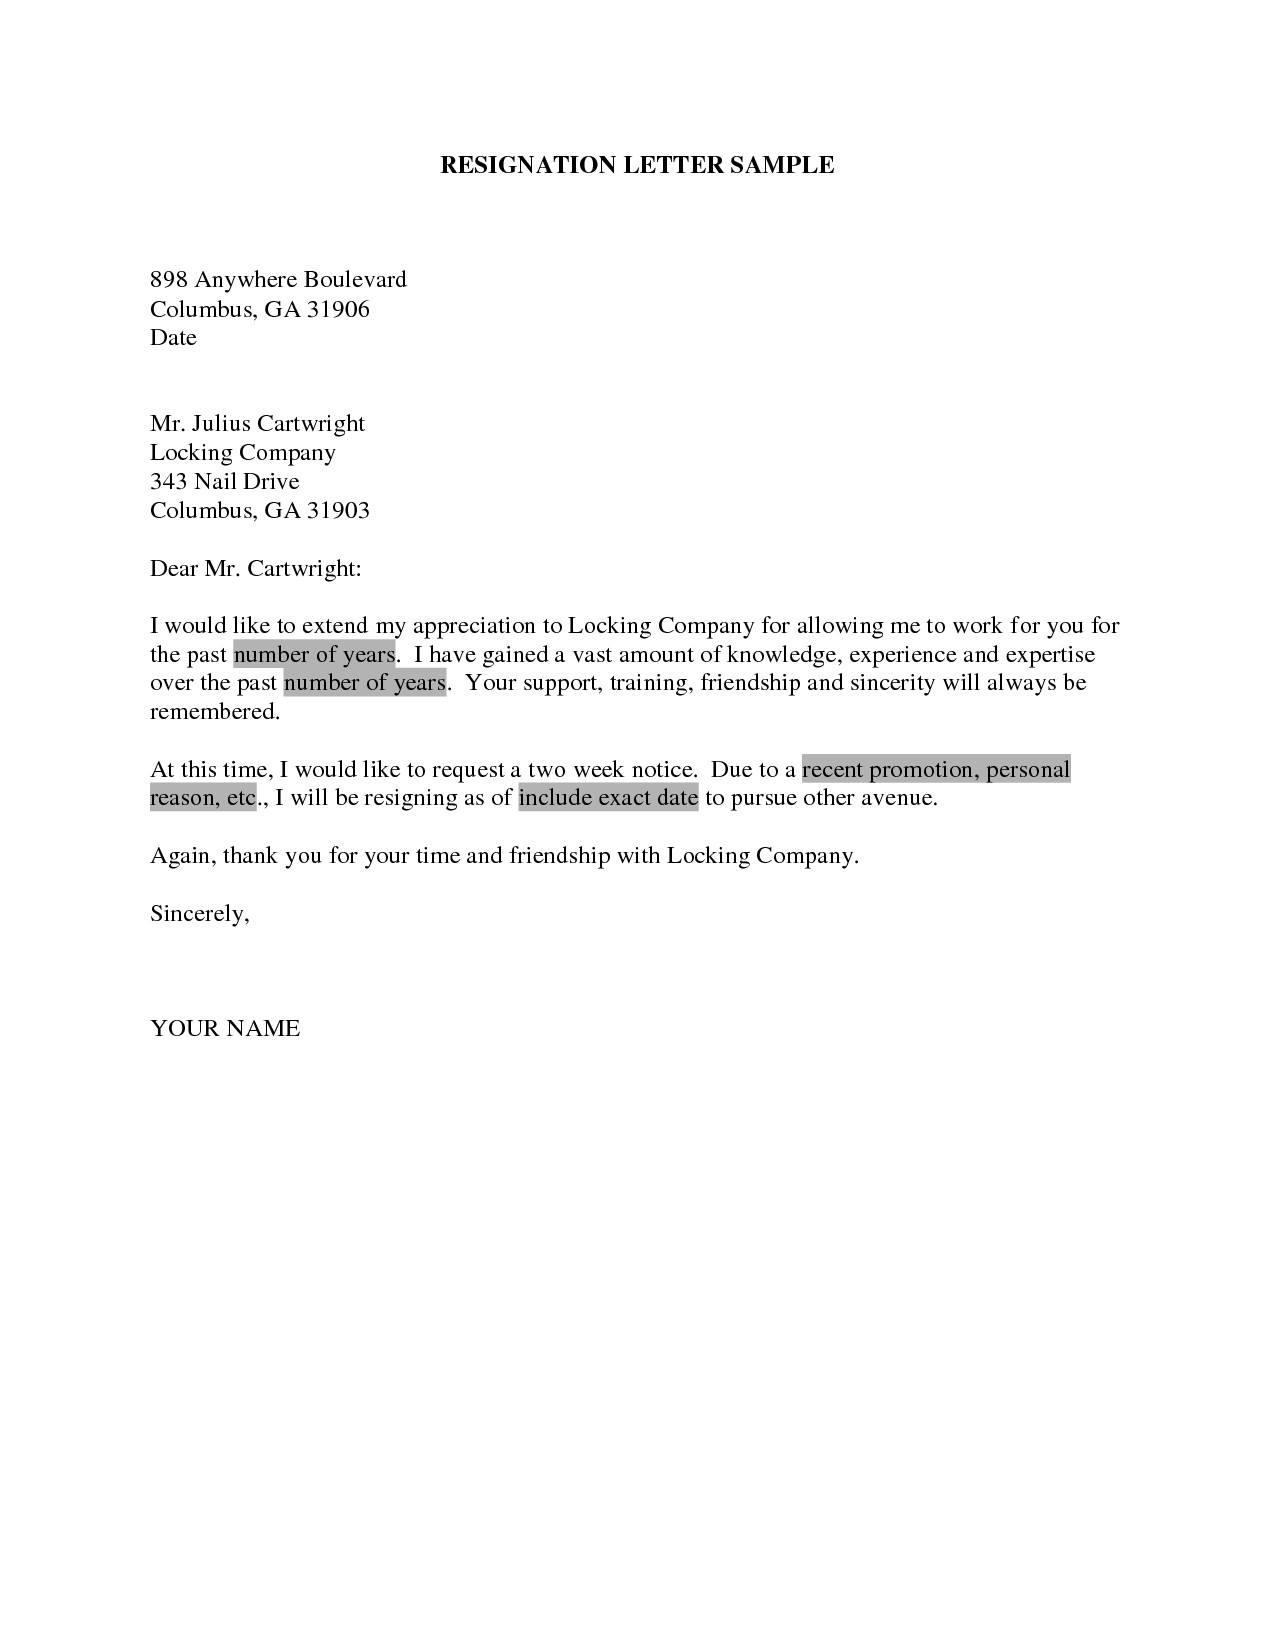 Resignation Letter Personal Reason Writing A Resignation Letter Due to Personal Reasons